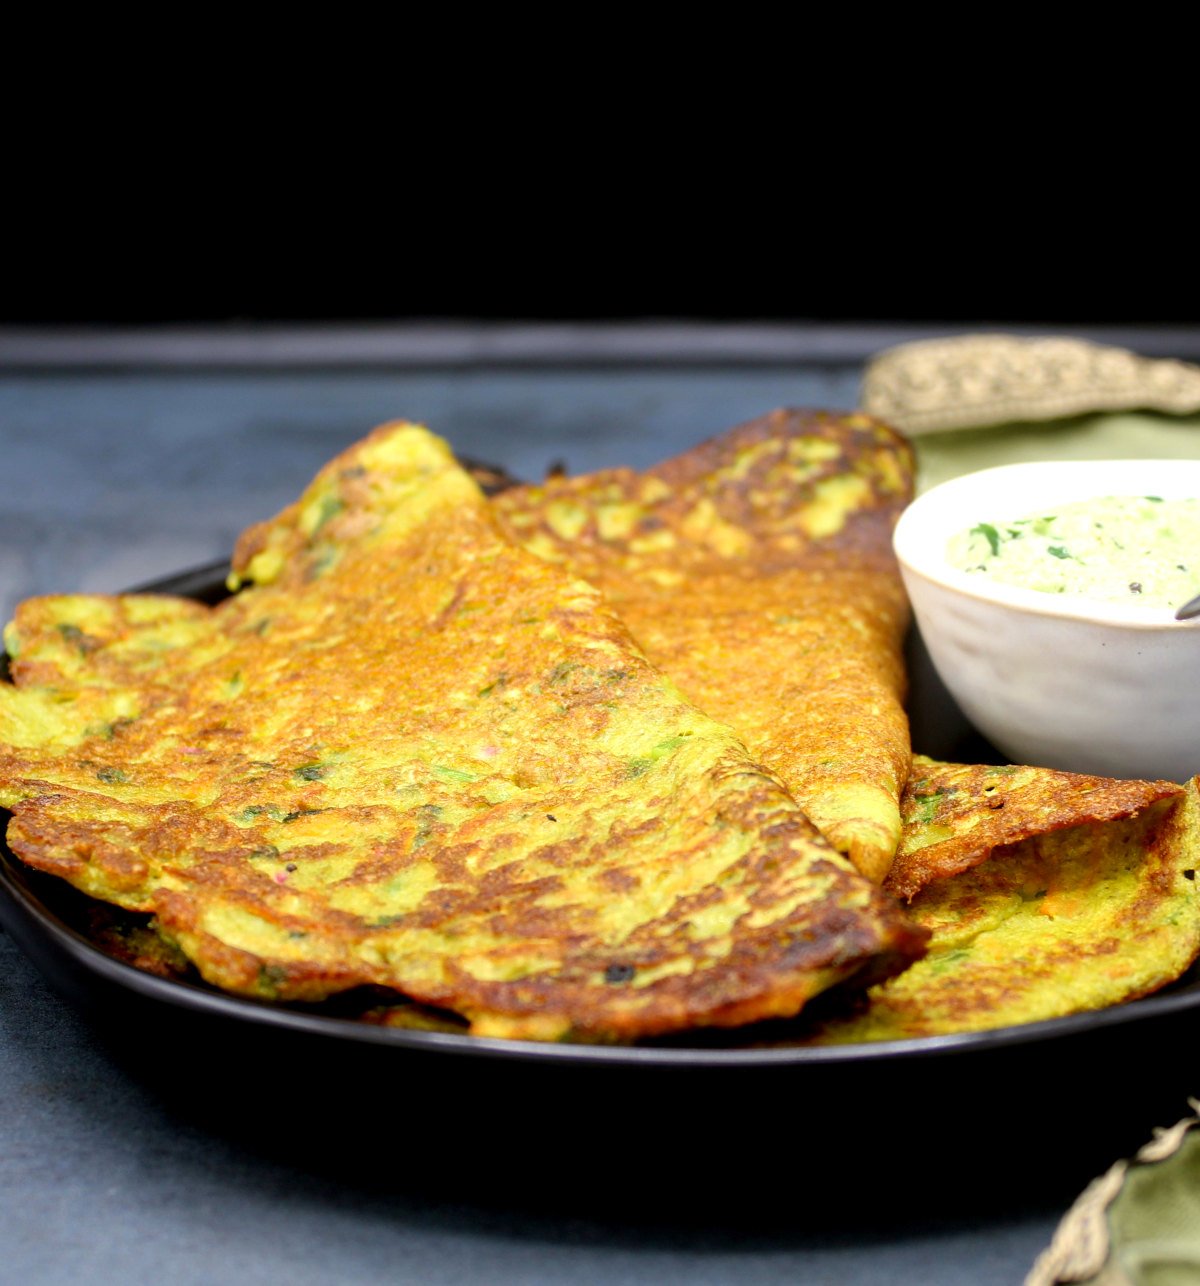 Moong cheela in a black plate with chutney.